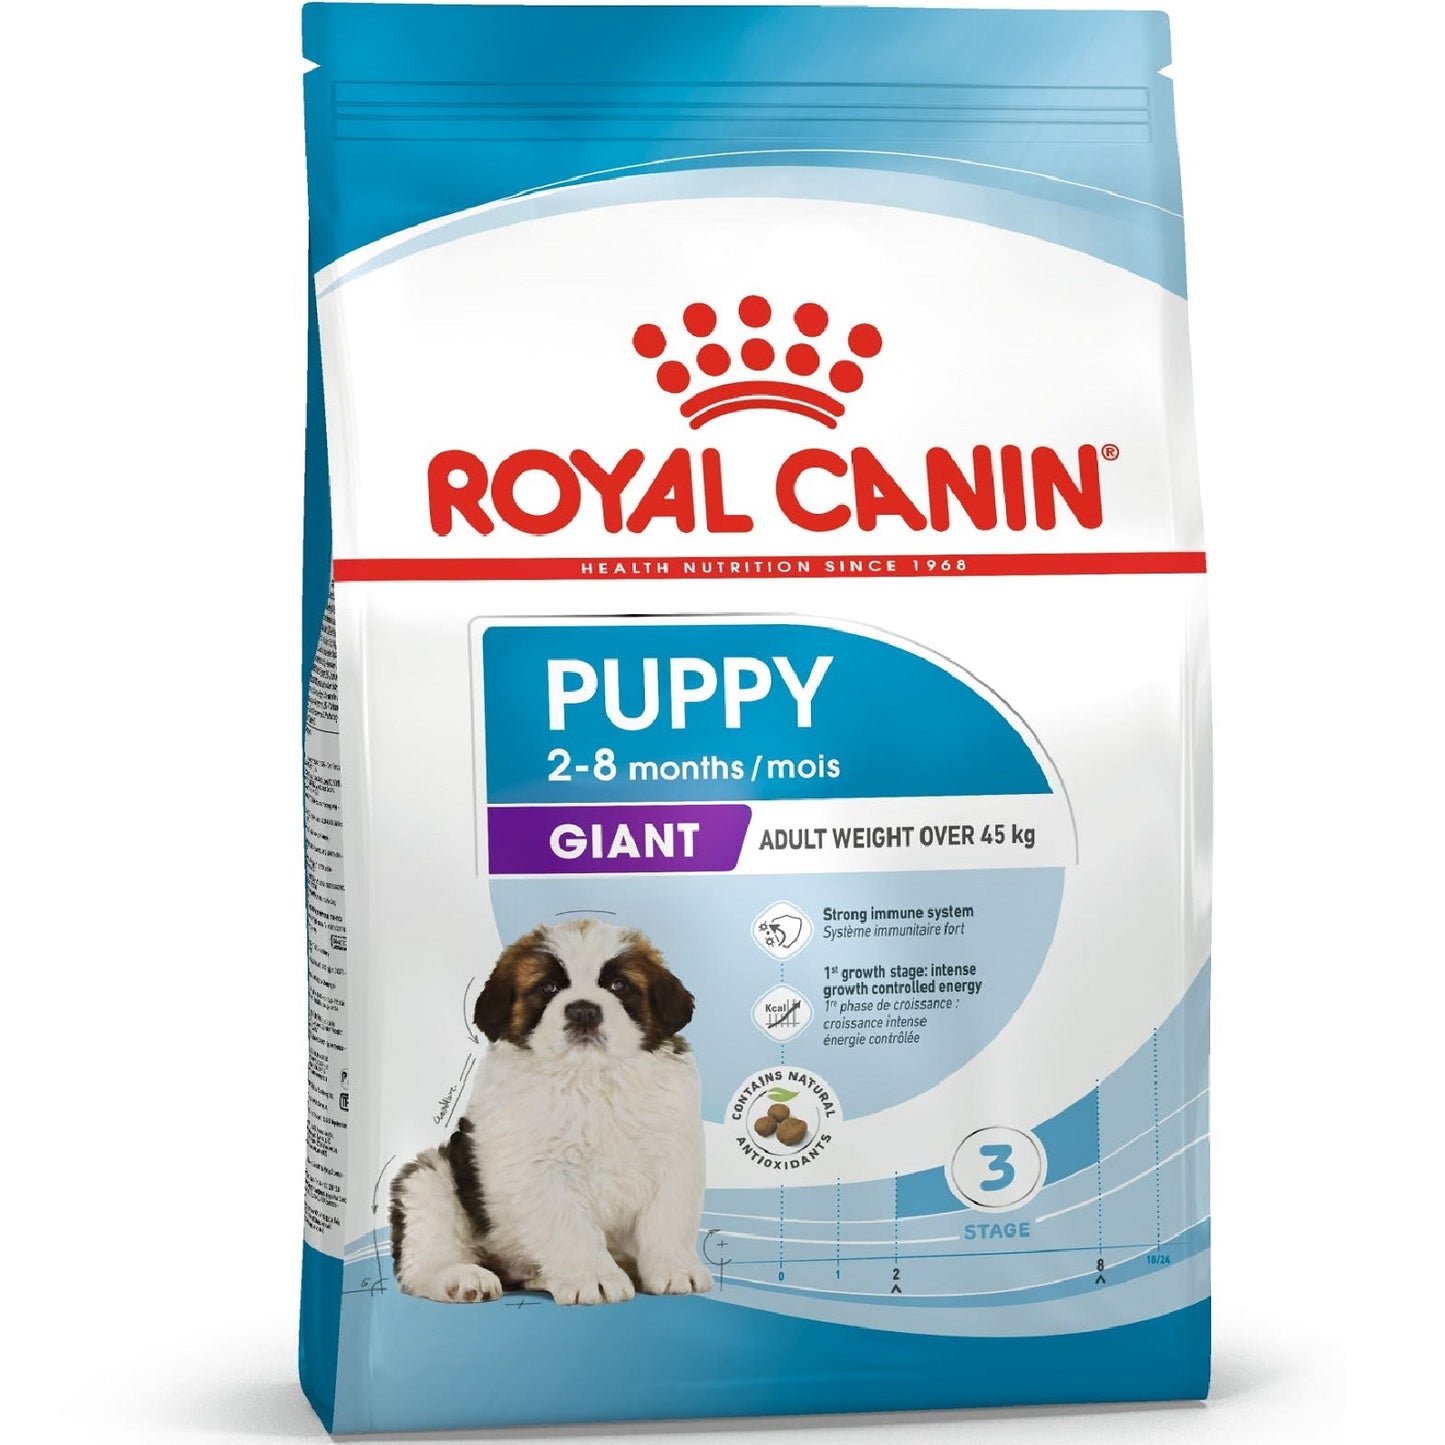 ROYAL CANIN - Giant Puppy (15kg)